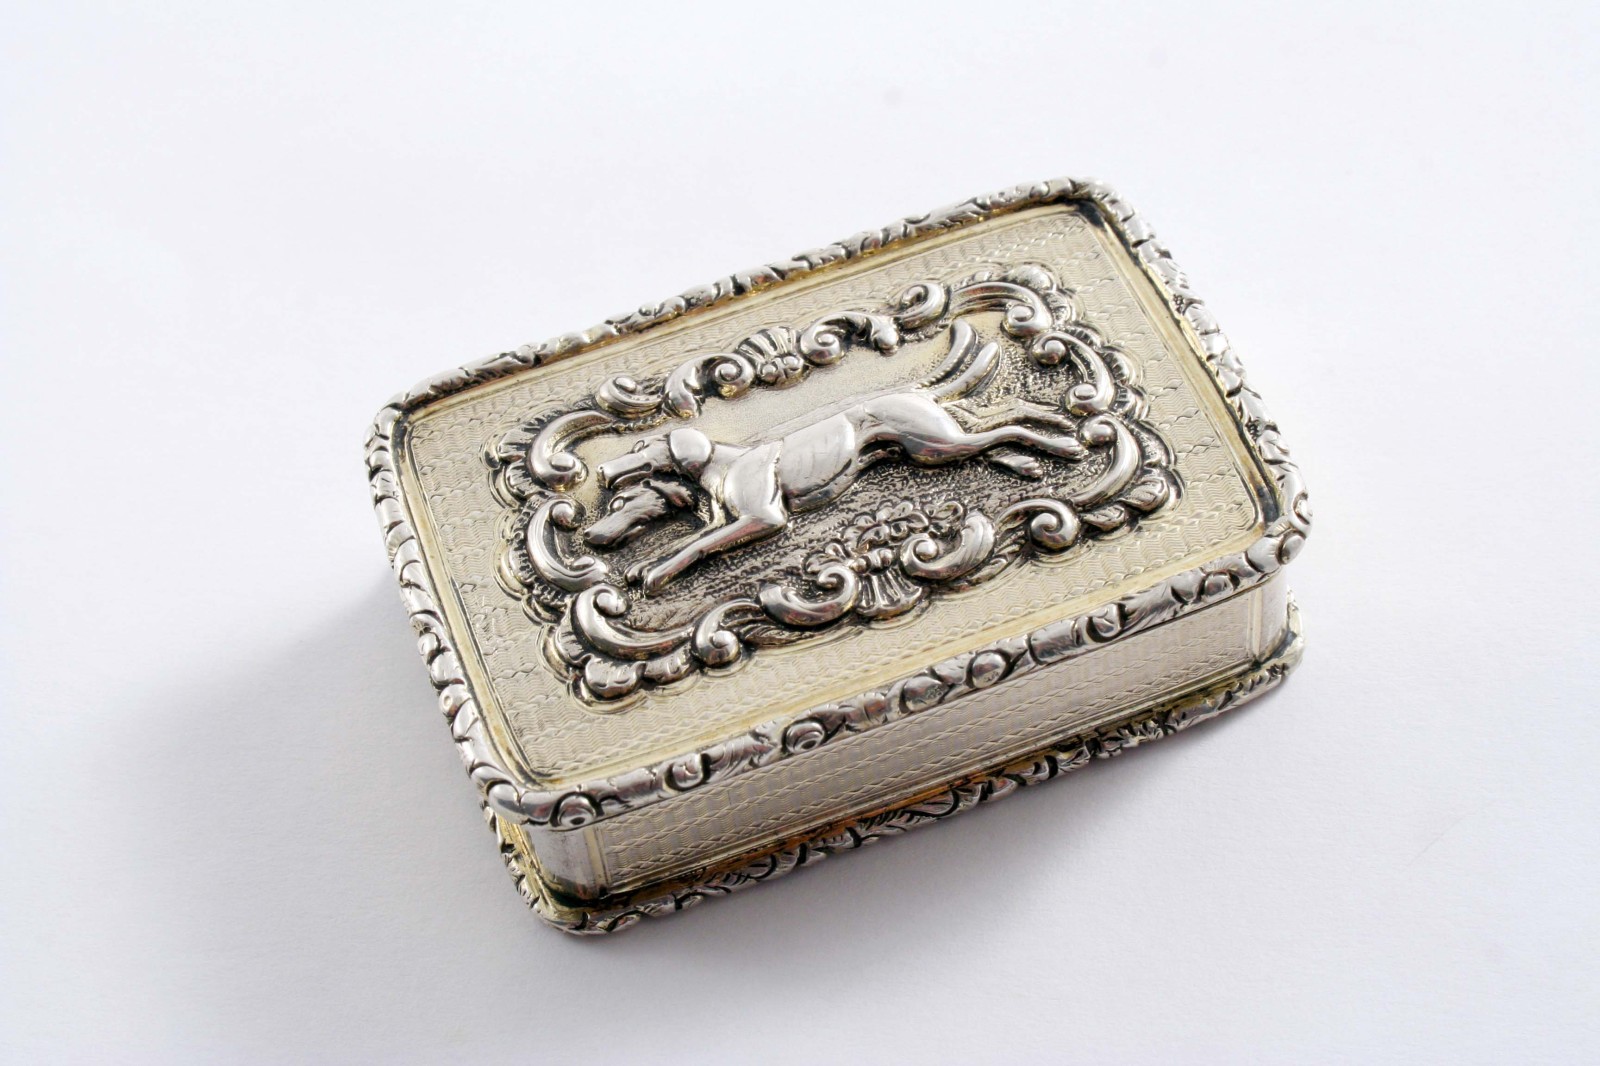 A GEORGE IV SILVERGILT SNUFF BOX of rounded oblong form with engine-turning, raised borders and an